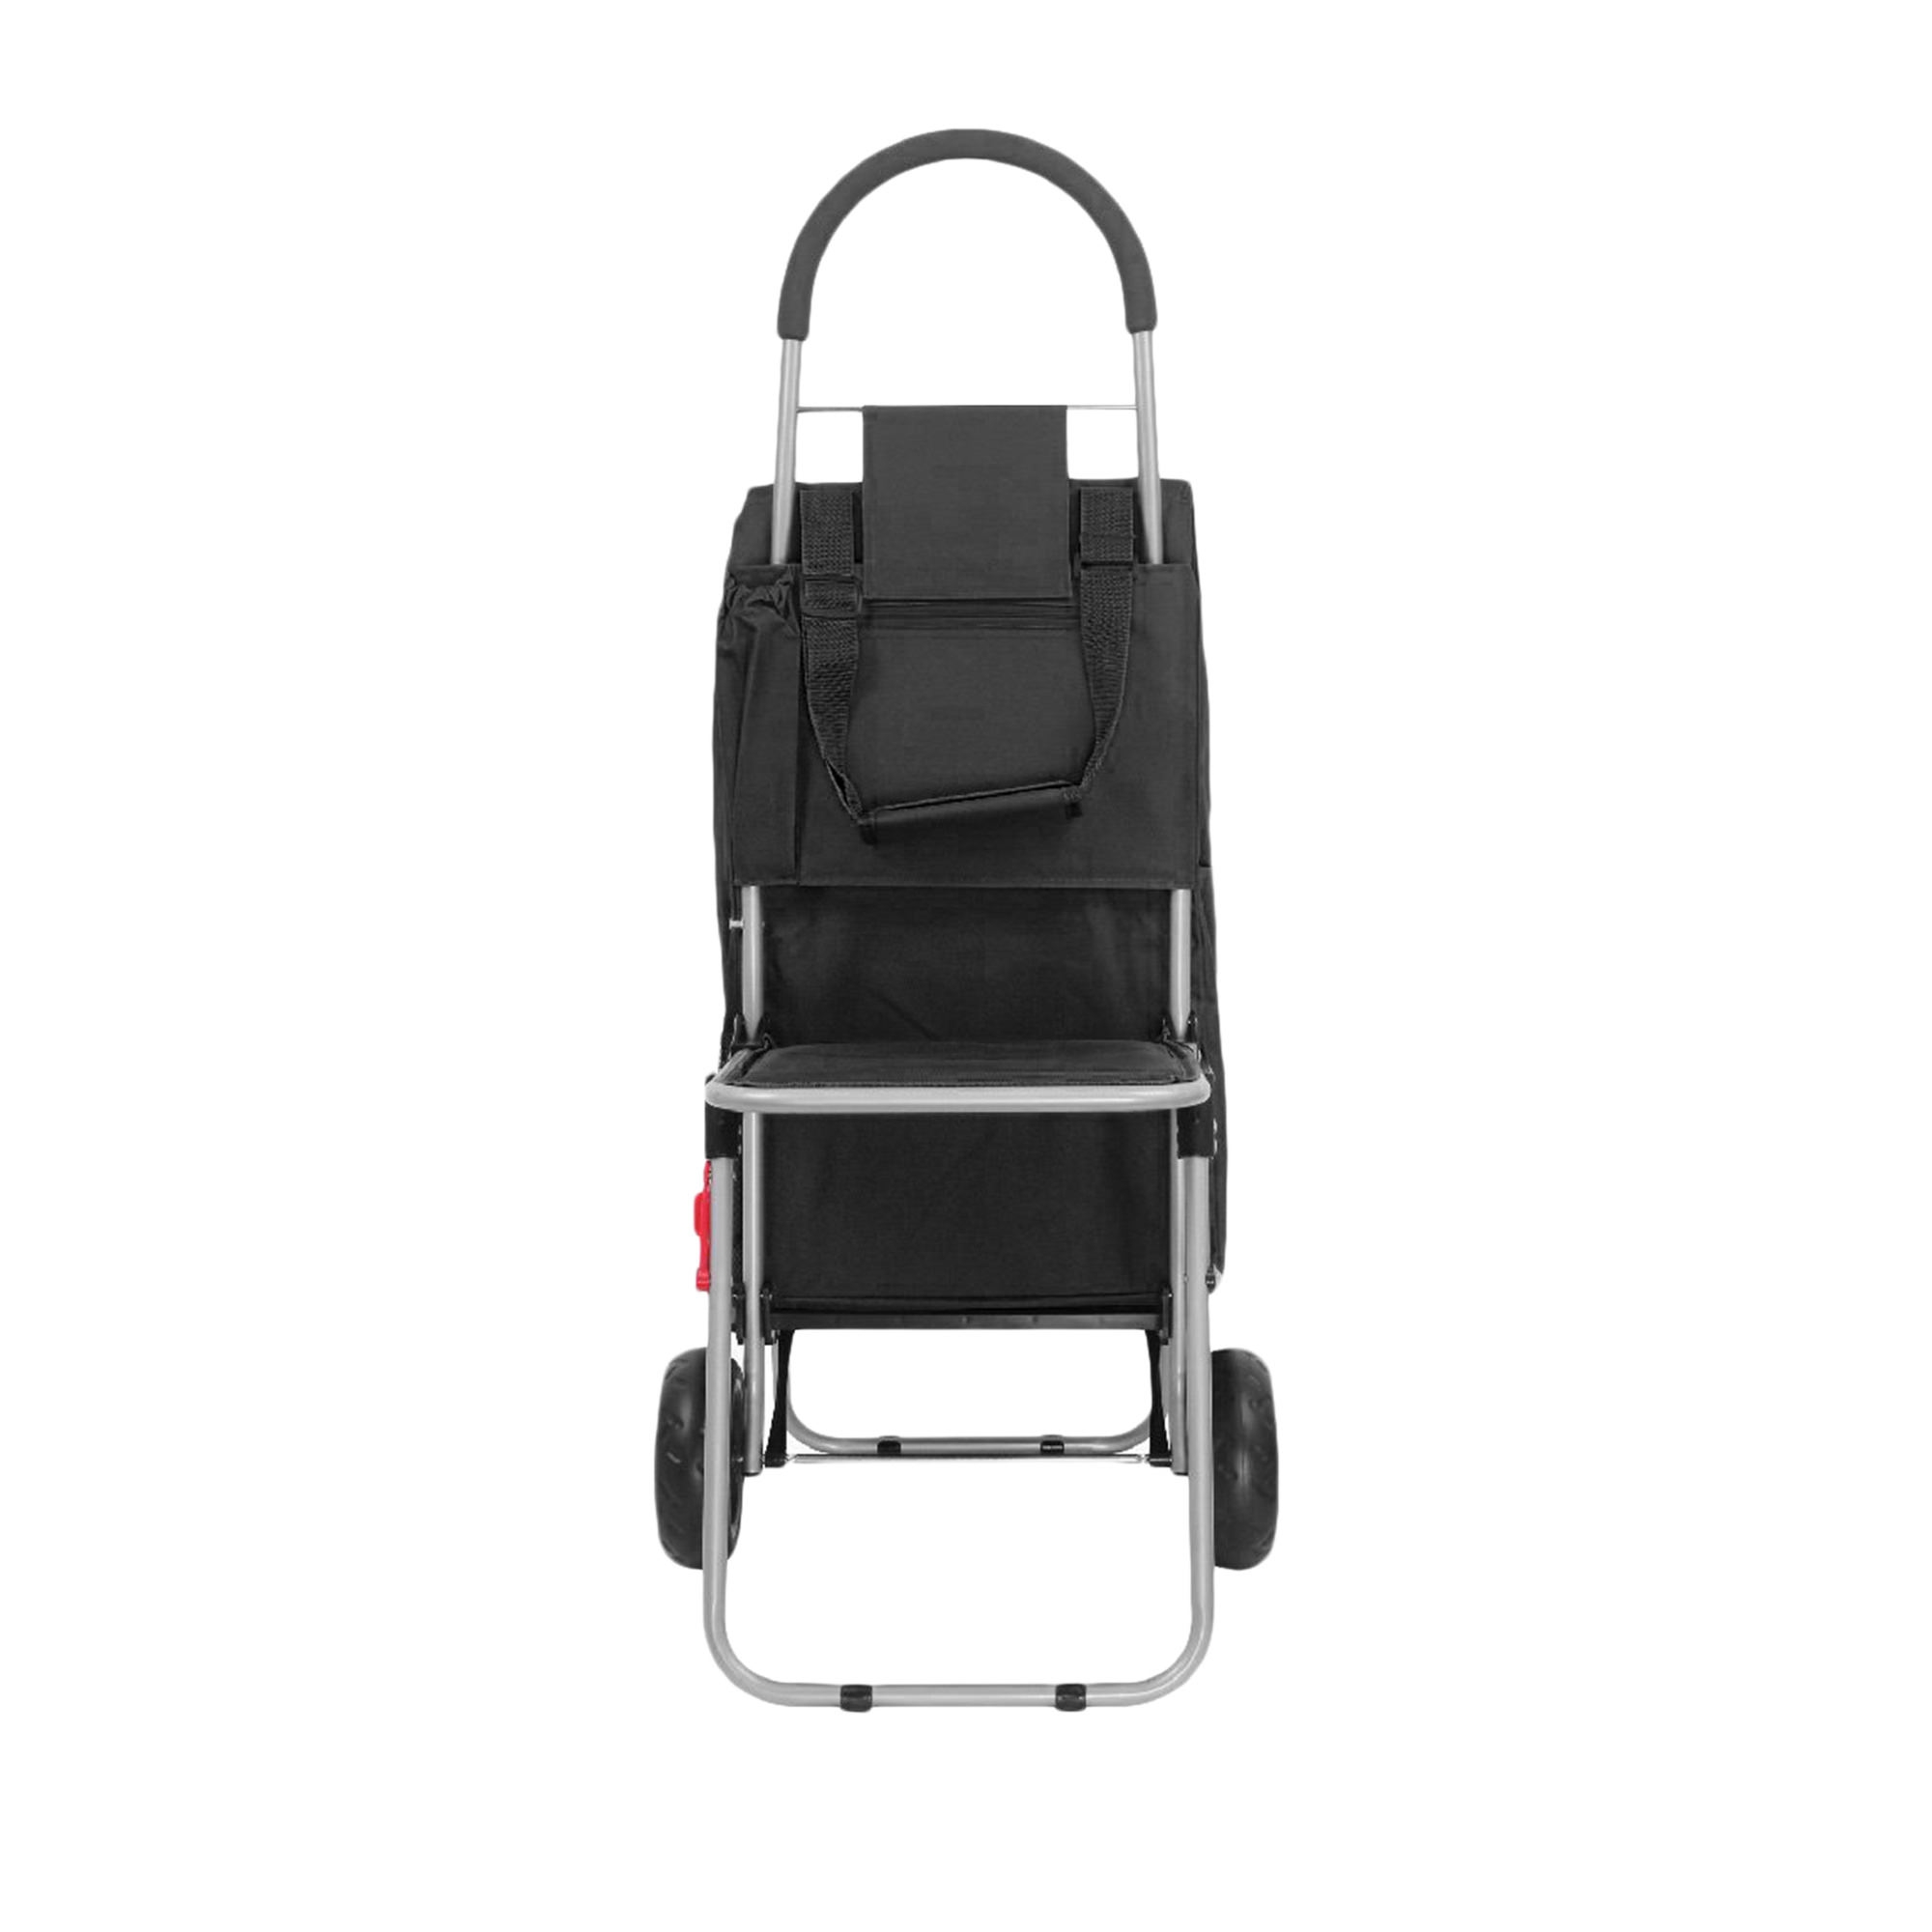 White Magic Handy Trolley with Seat Black Image 2